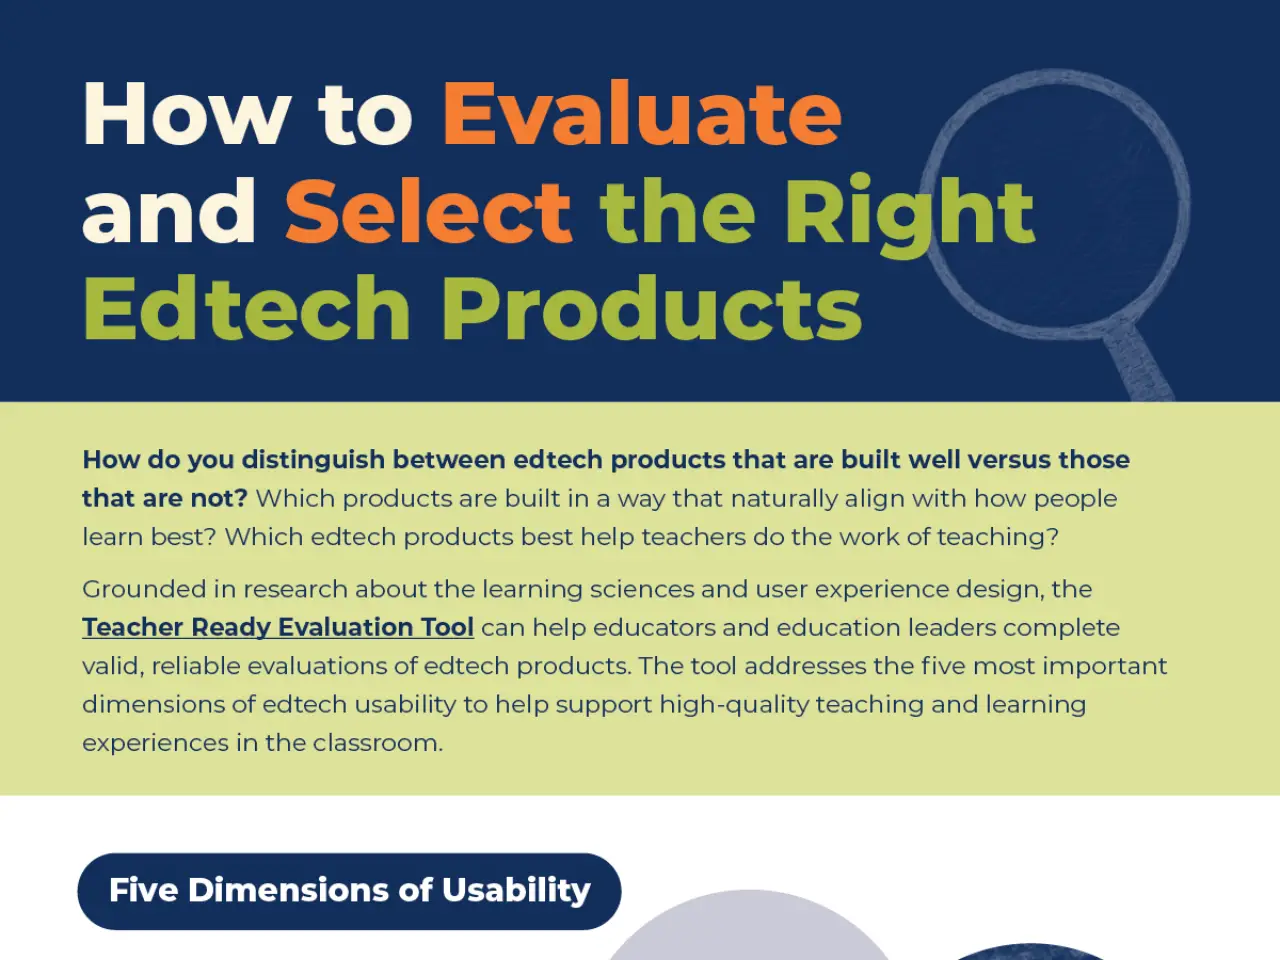 A Framework for Right Edtech Products